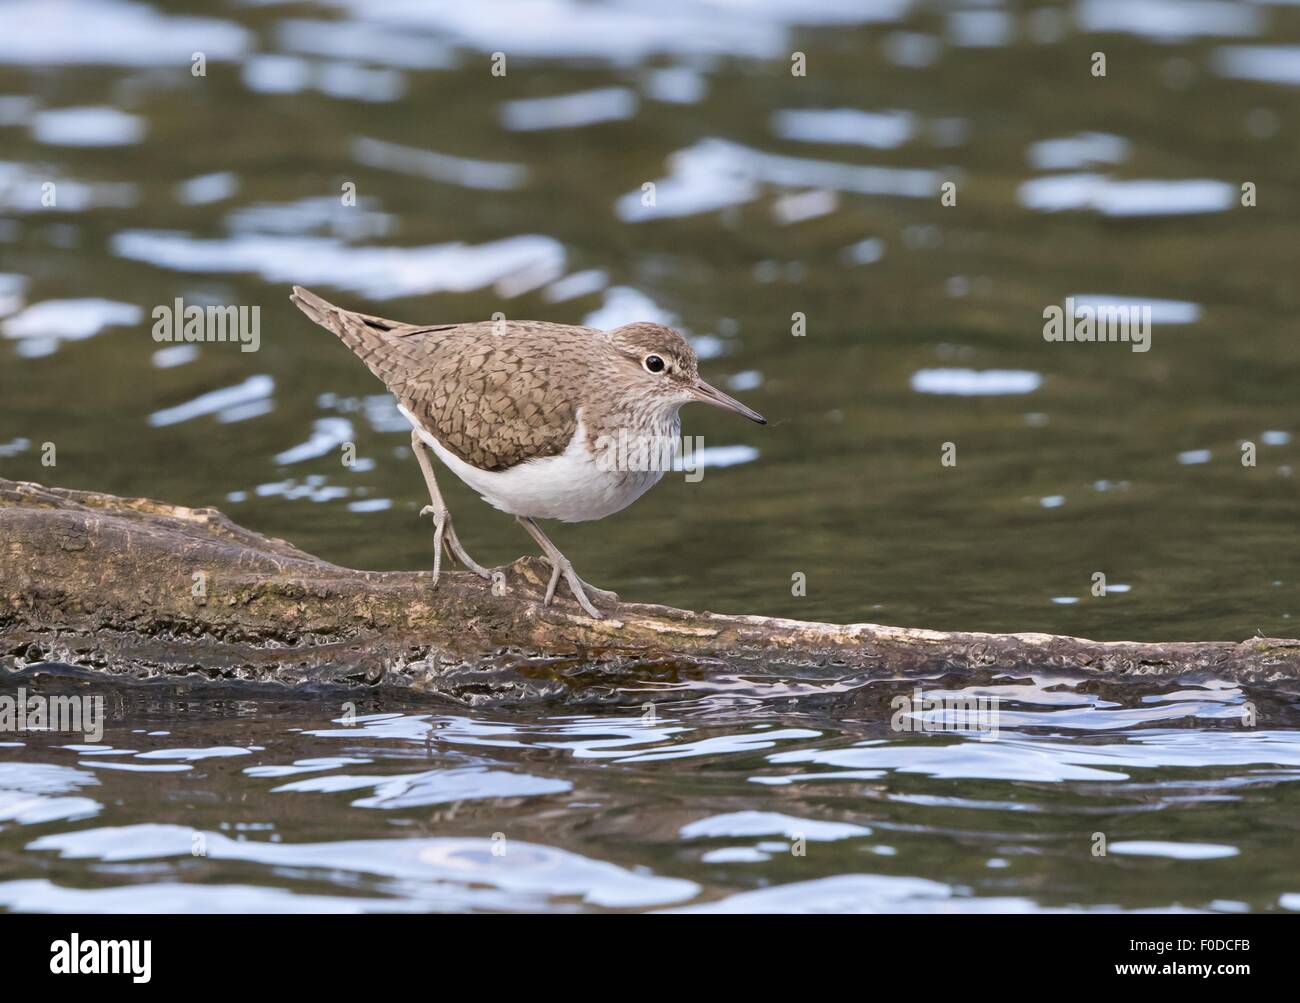 Sandpiper (Actitis hypoleucos) on a tree trunk in the water, Hesse, Germany Stock Photo